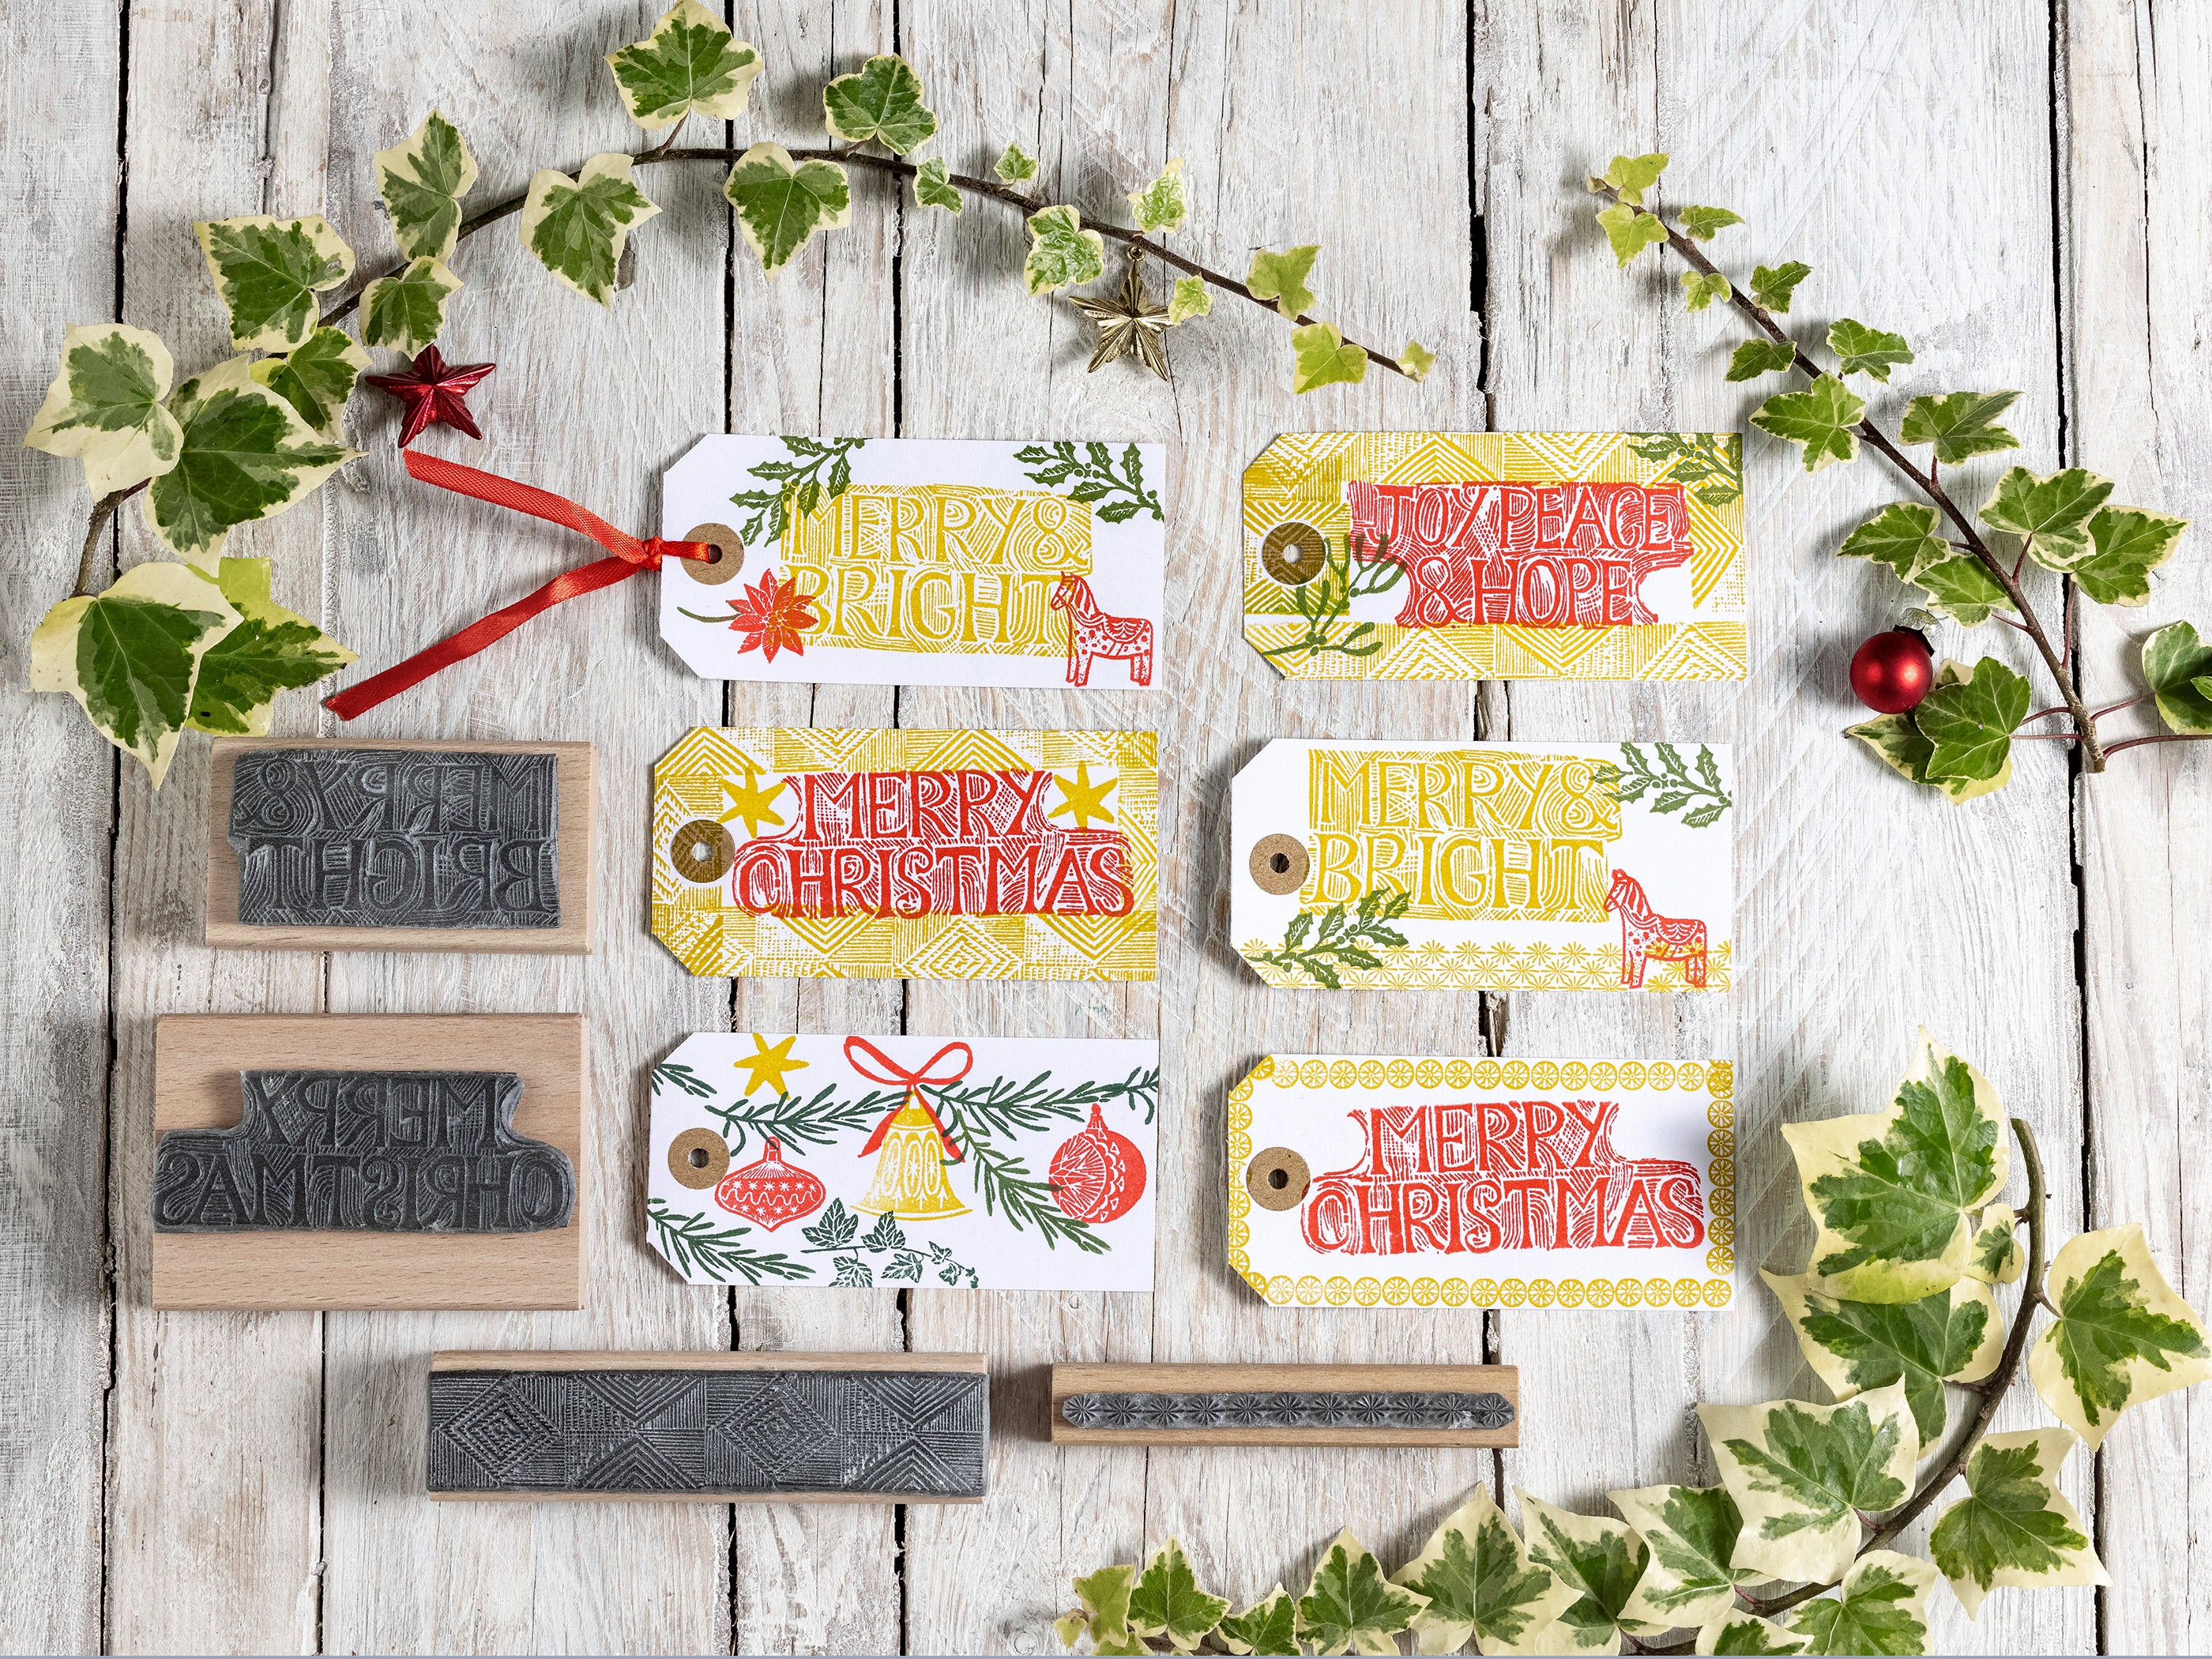 Merry Christmas Stamp, Joyeaux Noel Stamp, and more Christmassy Words - Noolibird